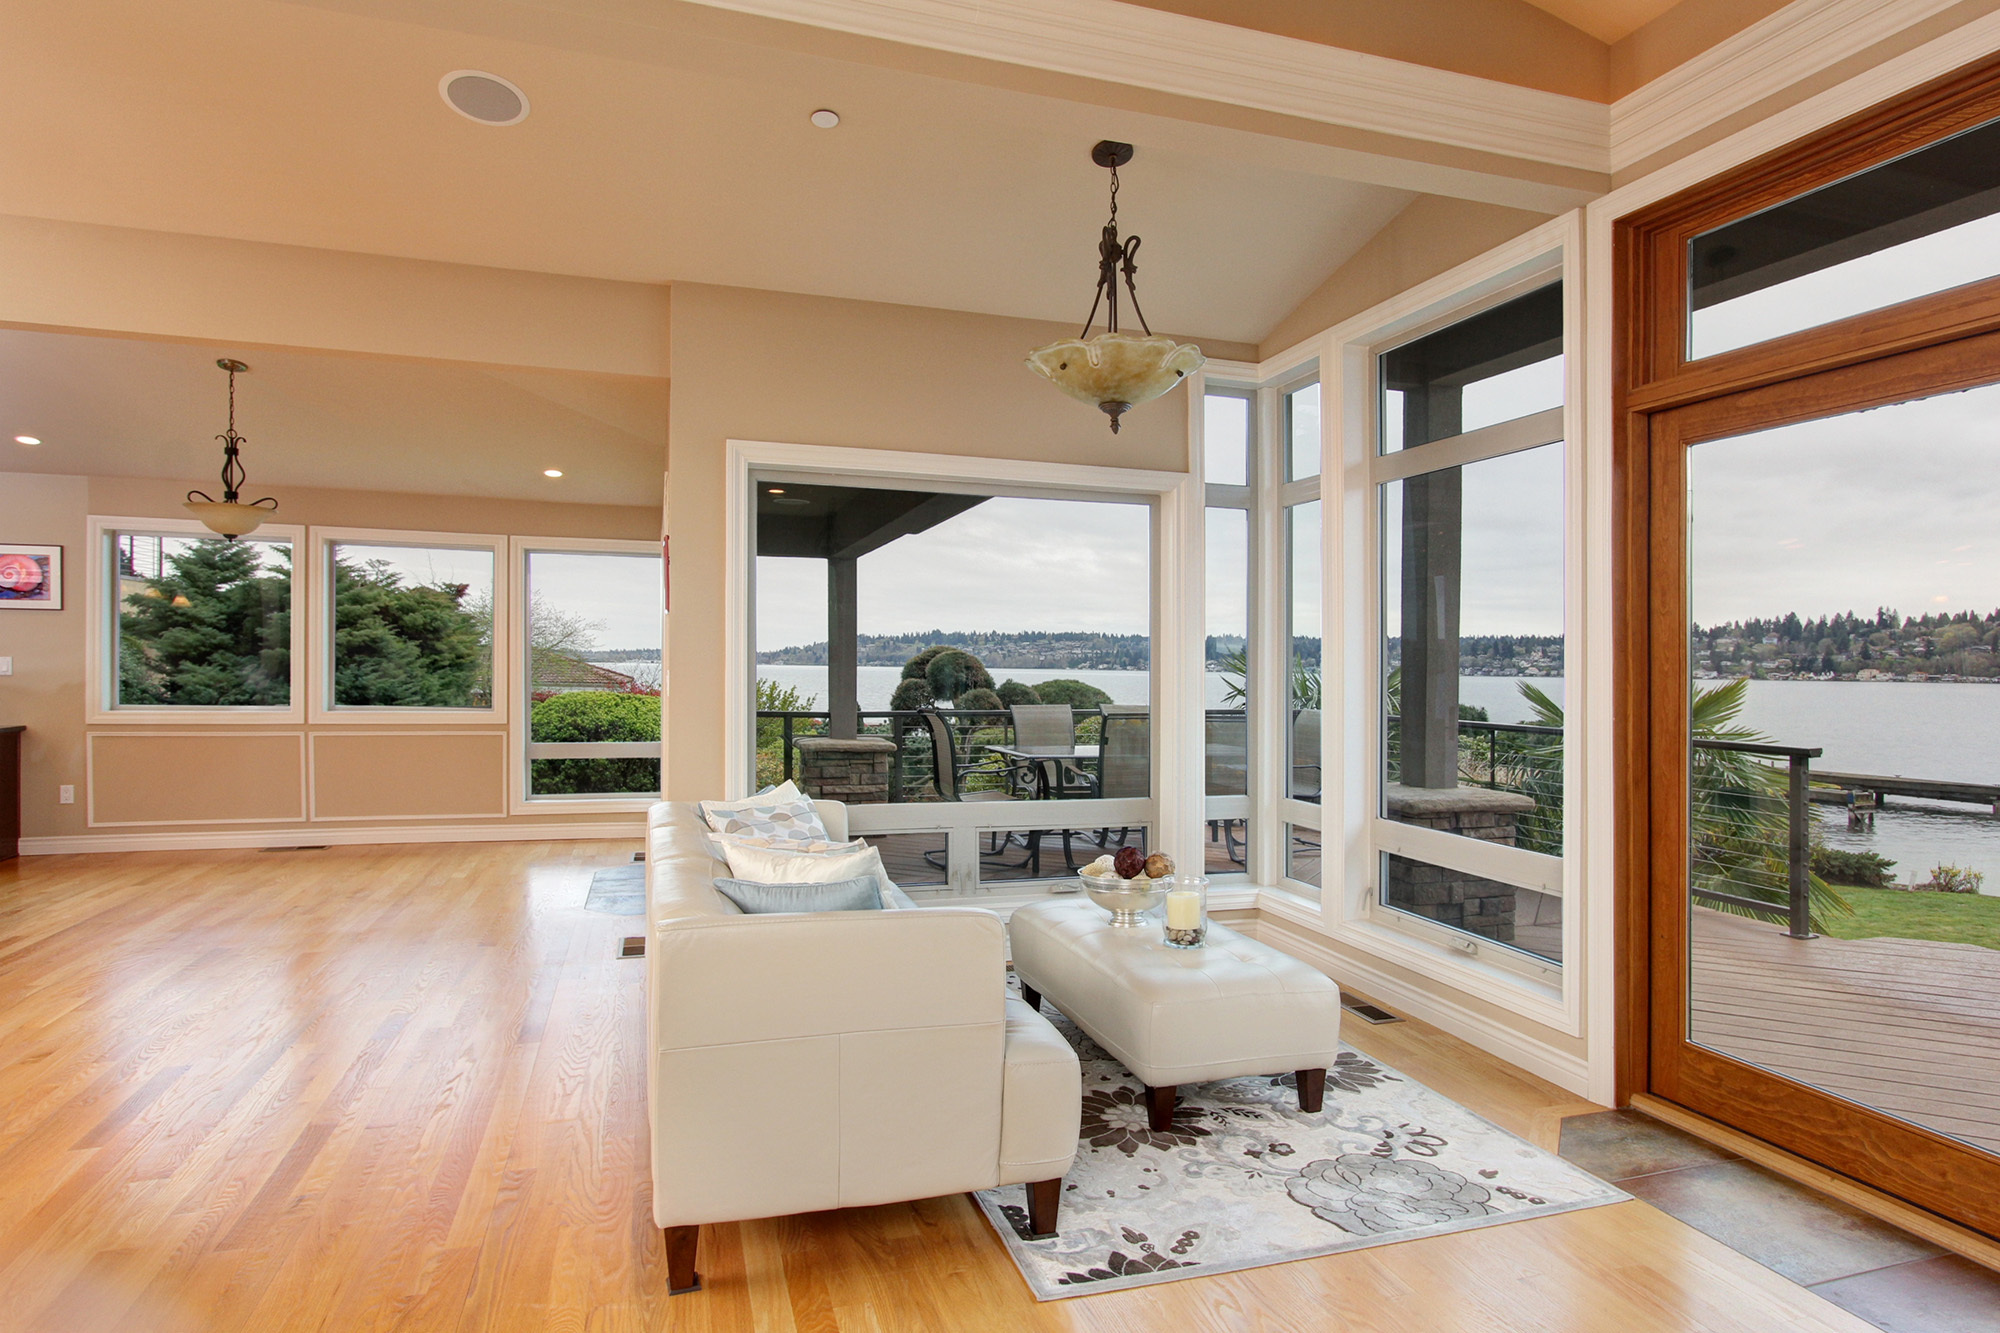 Property Photo: Entertainer's delight; great room layout 13253 Holmes Point Dr NE  WA 98034 